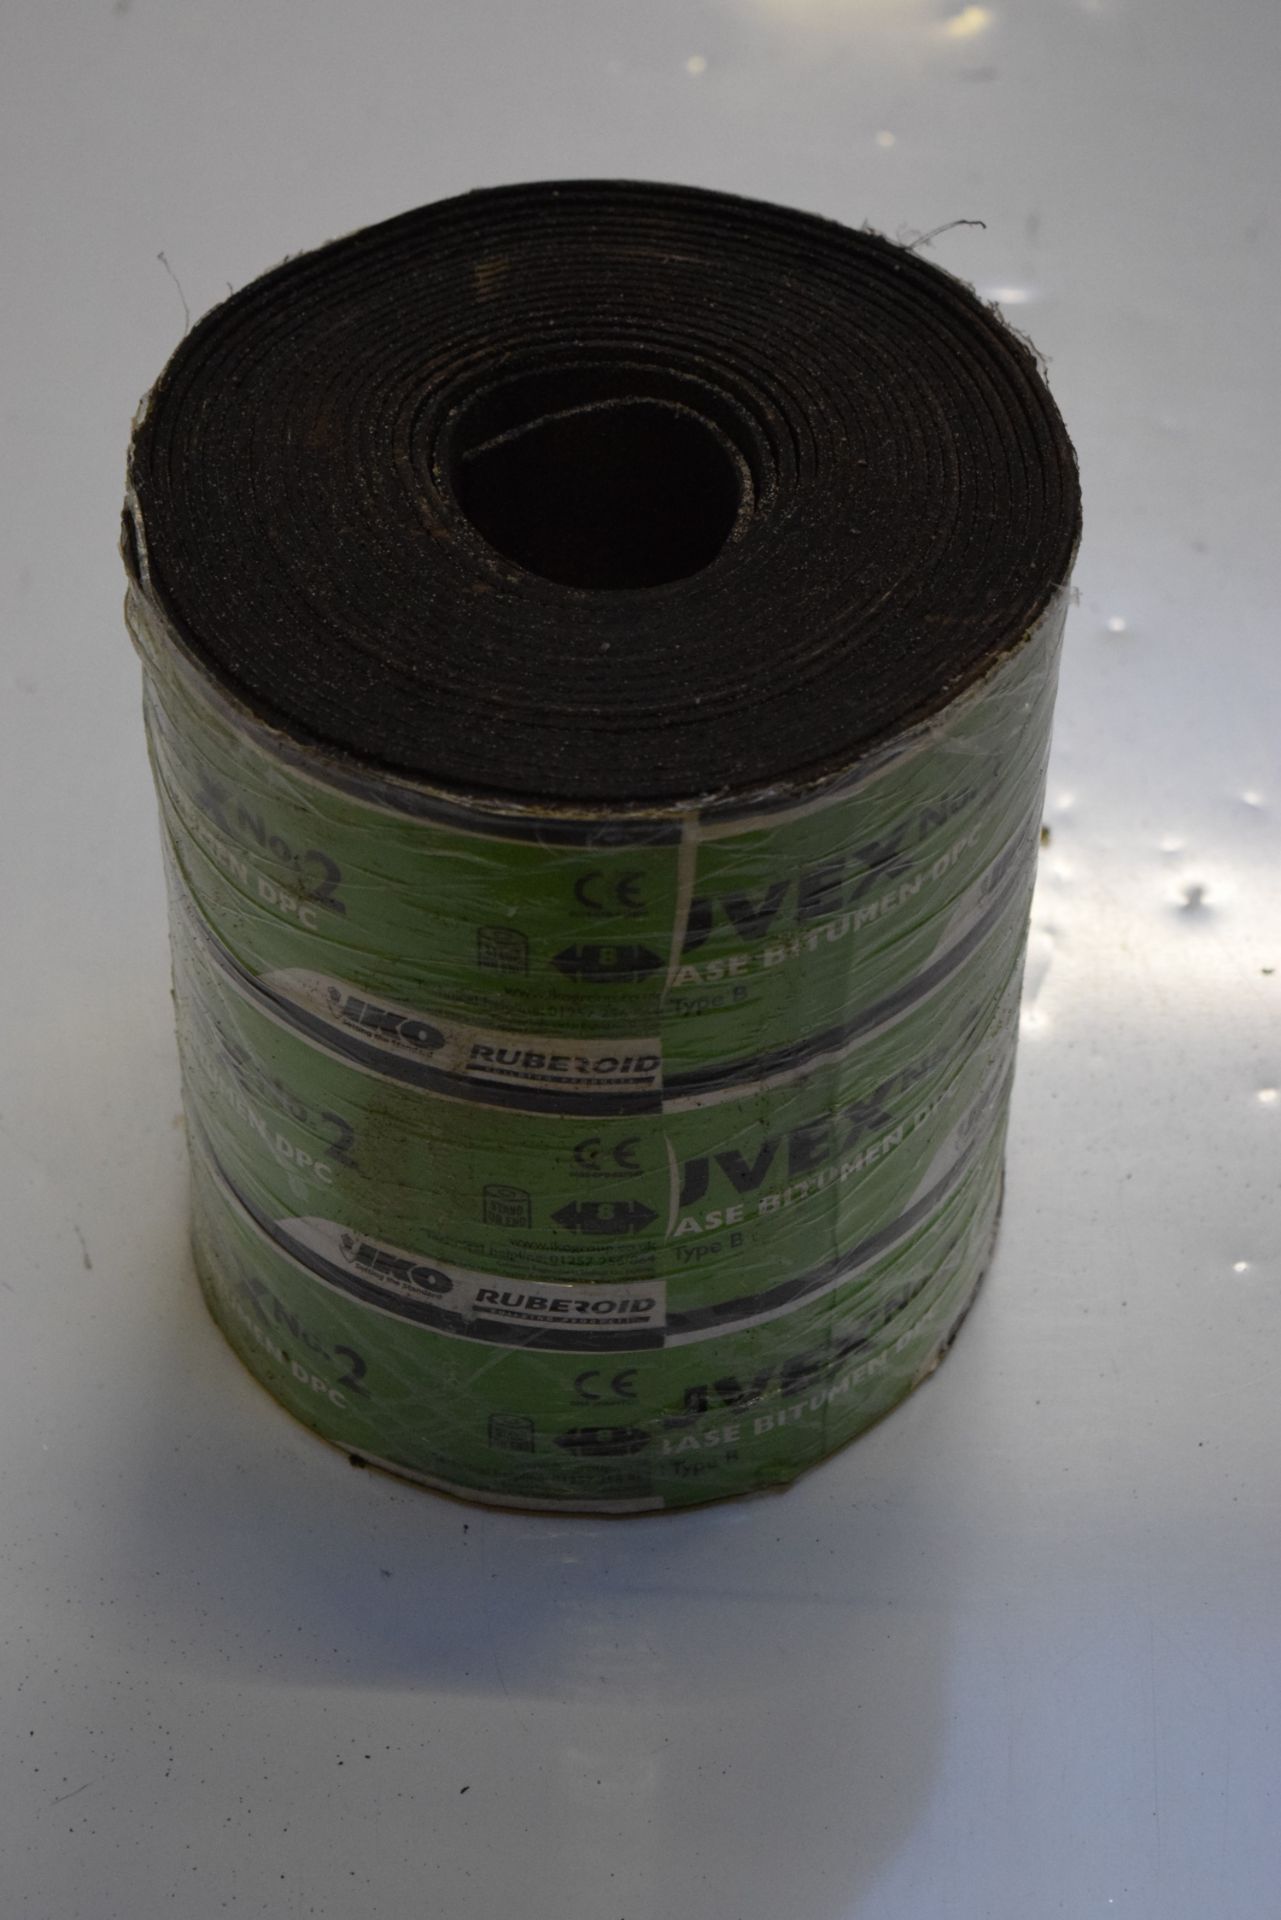 1 x PLUVEX NO 2 FIBRE BASE BITUMEN DPC *PLEASE NOTE THAT THE BID PRICE IS MULTIPLIED BY THE NUMBER